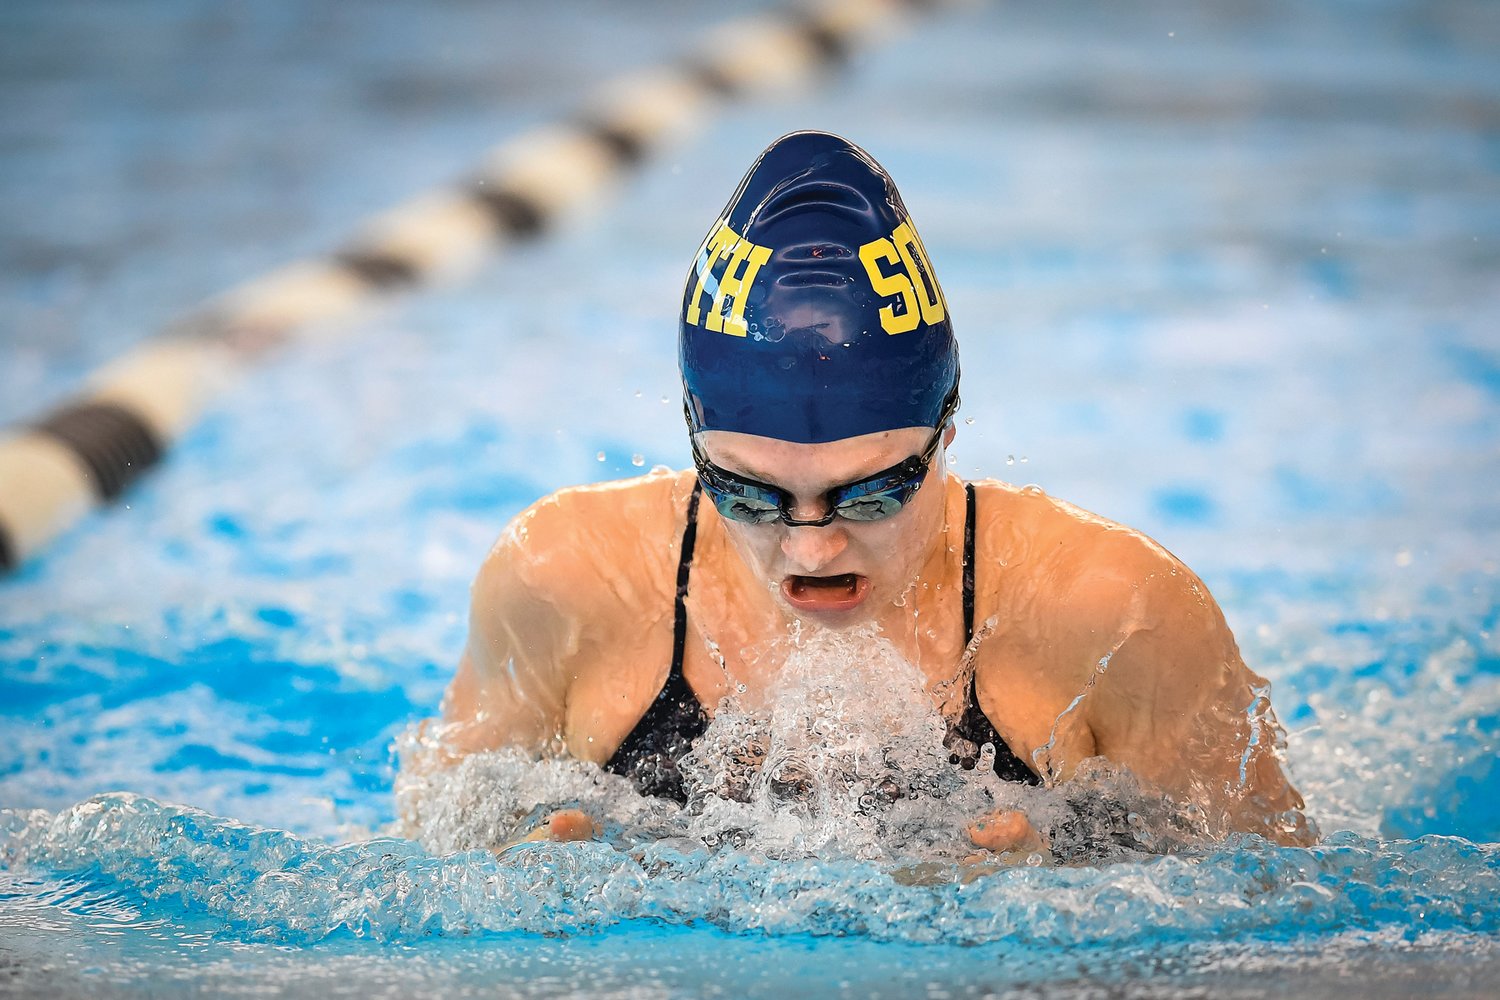 Michael A. Apice
Council Rock South’s Ella Rossi during the breaststroke leg of the girls 200 medley relay.